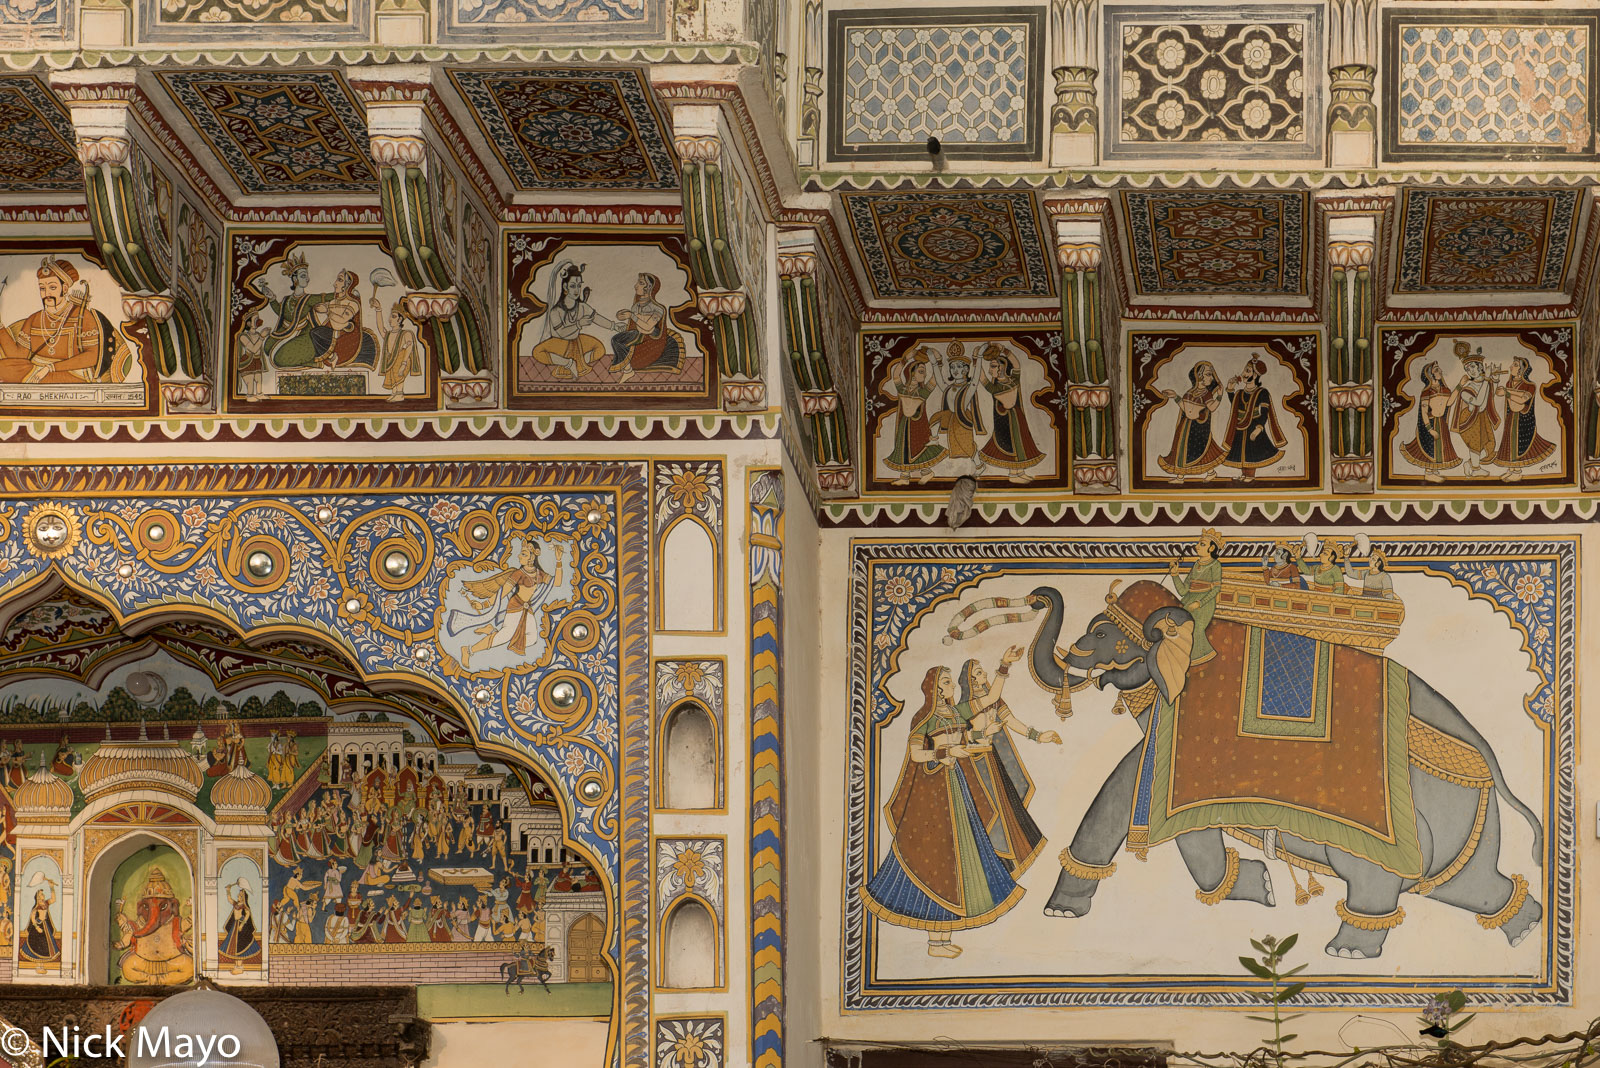 Murals on the wall of a Mandawa haveli.